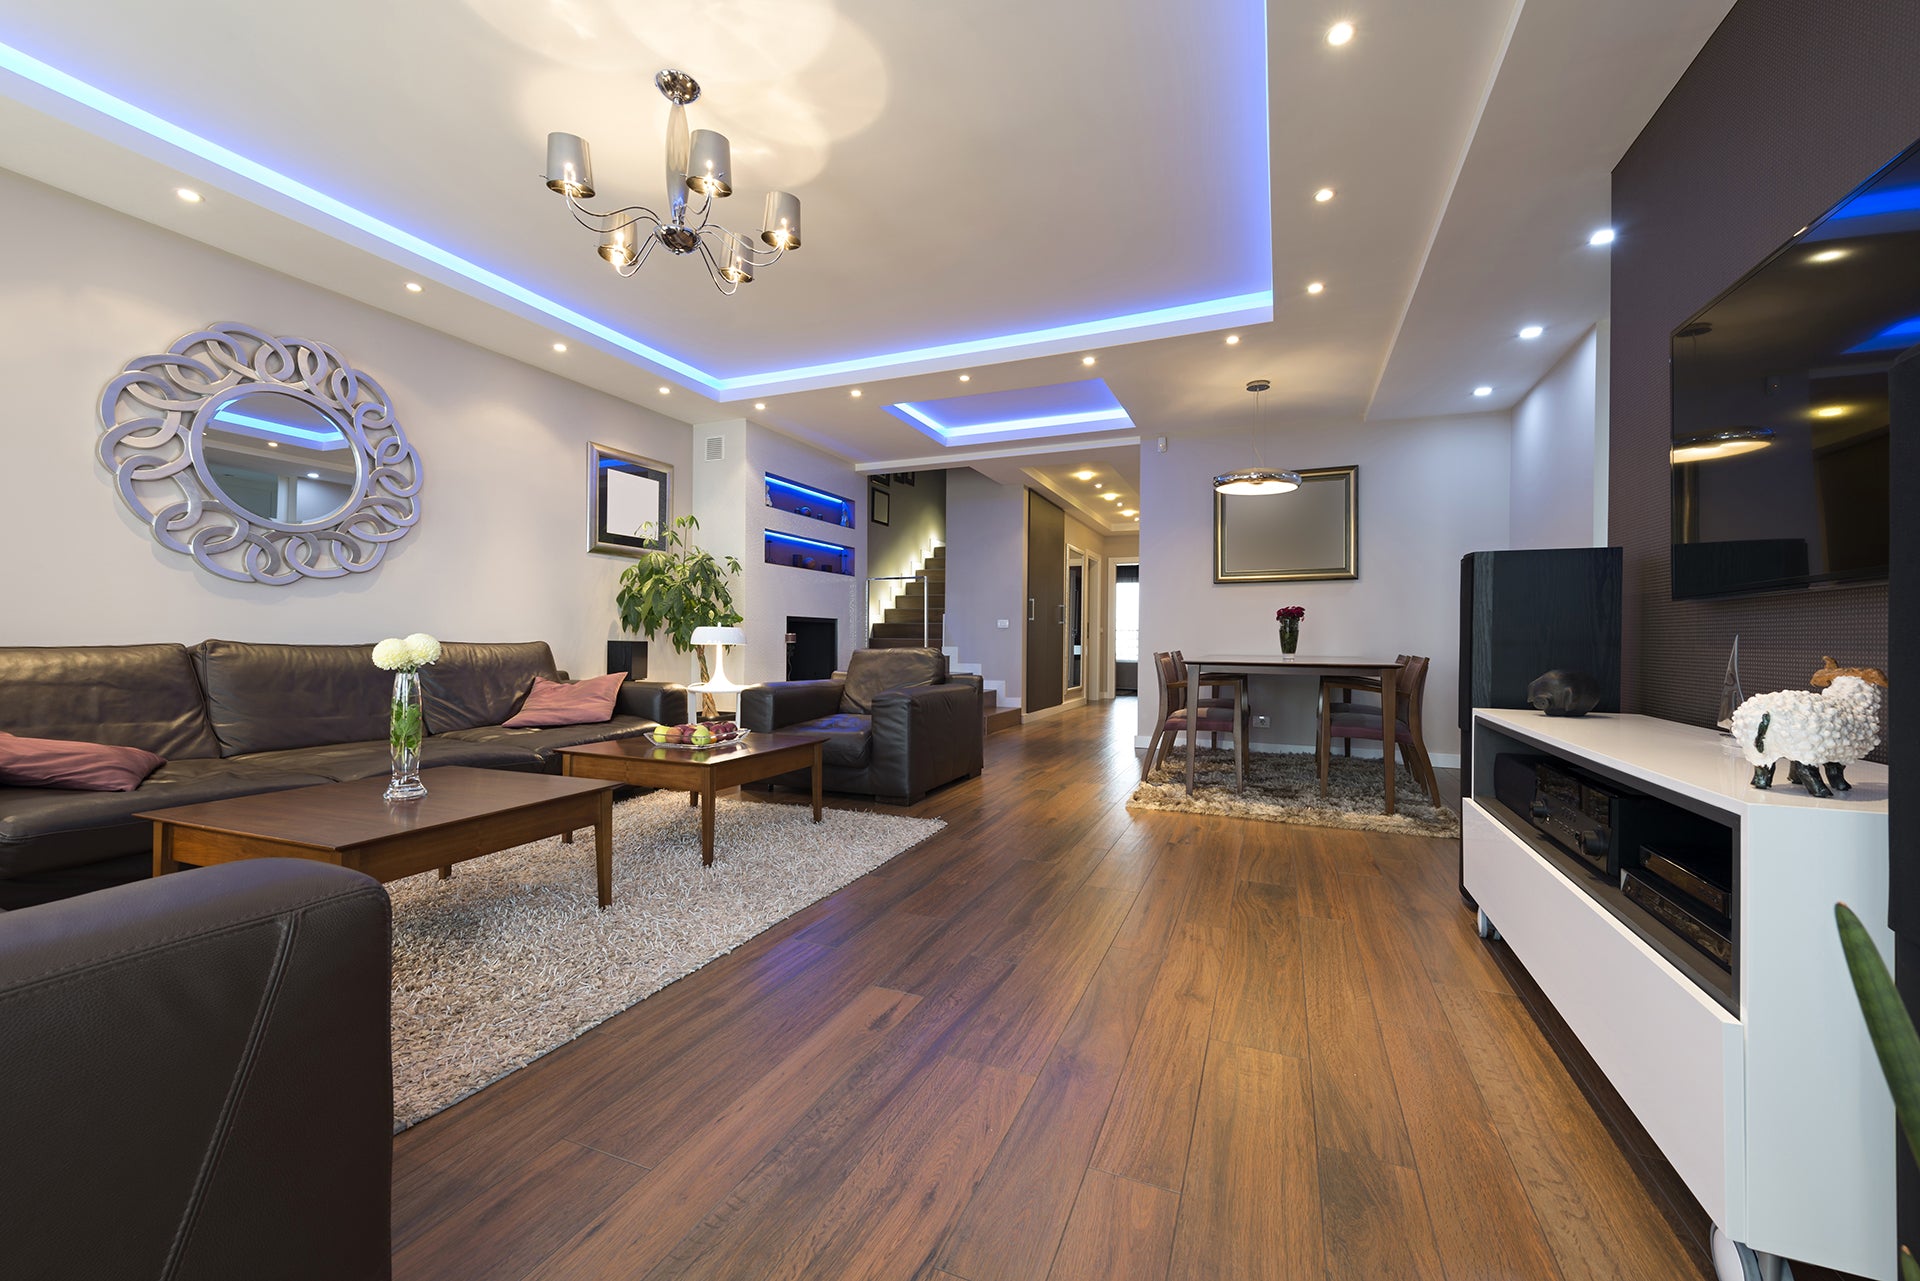 A Practical Guide To LED Lighting For Your Home